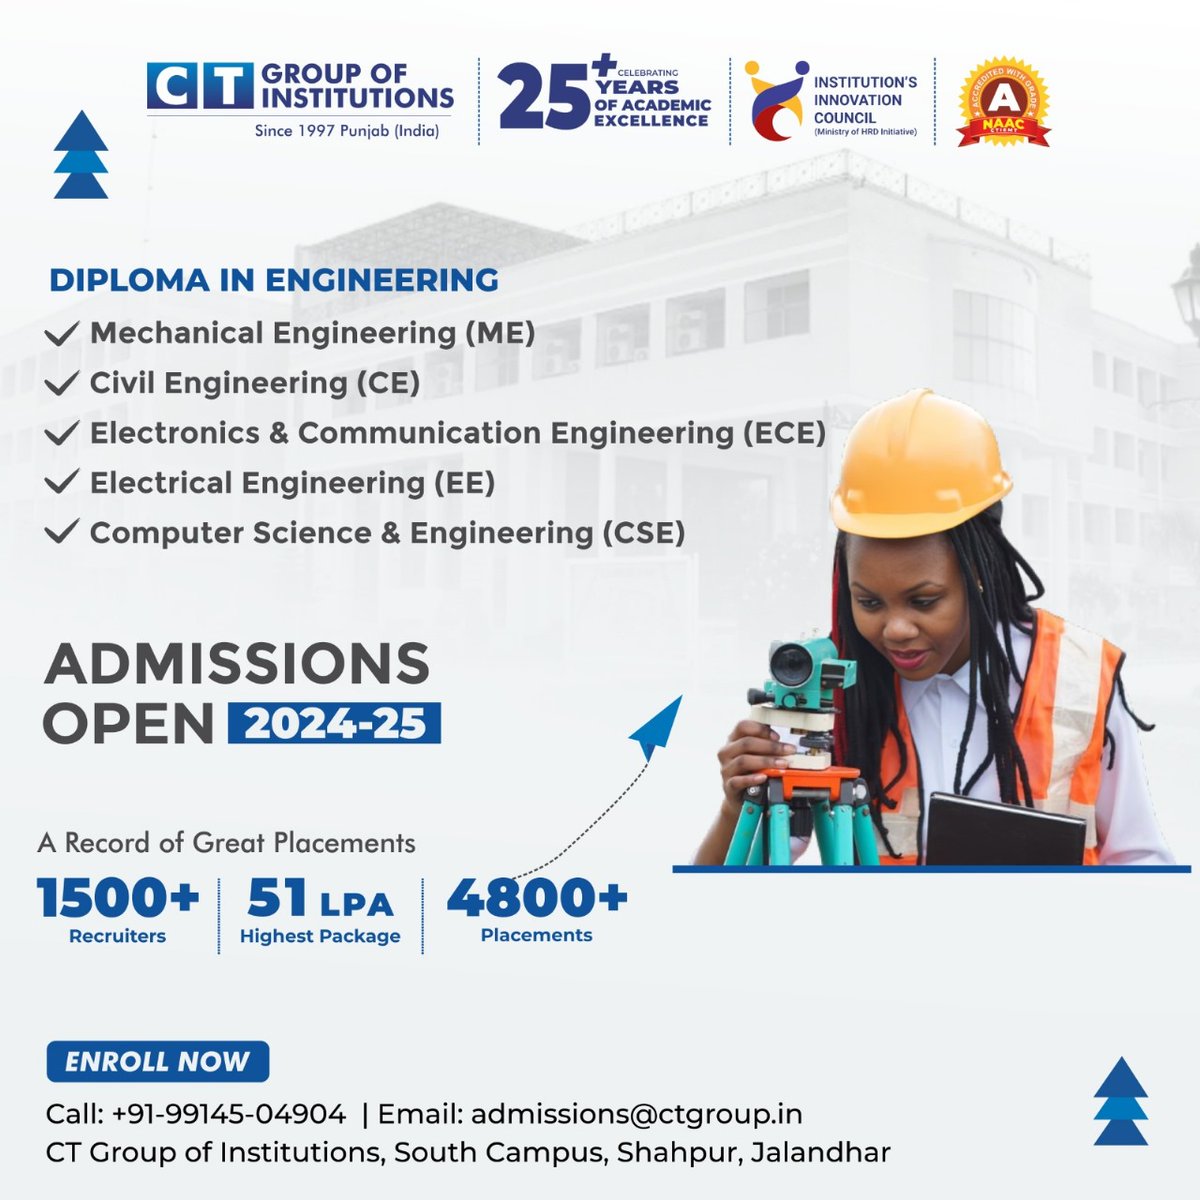 Join us at CT Group of Institutions for an exciting journey in Engineering! Admissions are open for the academic year 2024-25! Enroll now to secure your place in the next generation of engineers. For admissions inquiries, contact us at +91-99145-04904 .